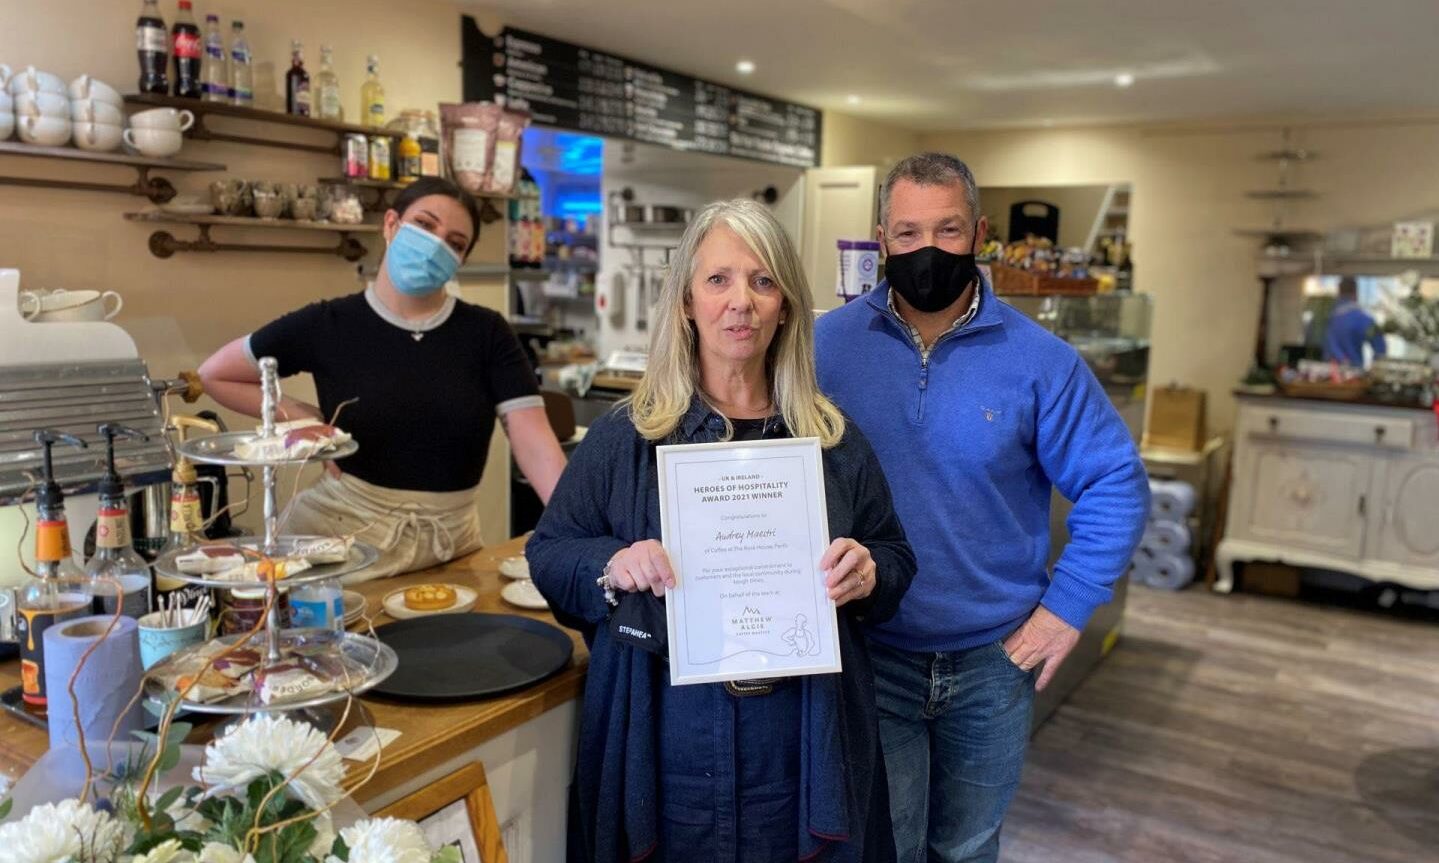 Audrey Maestri (centre), owner of the Olive Tree Takeaway. Pictured with husband John Maestri (right) and staff member Leigh (left).